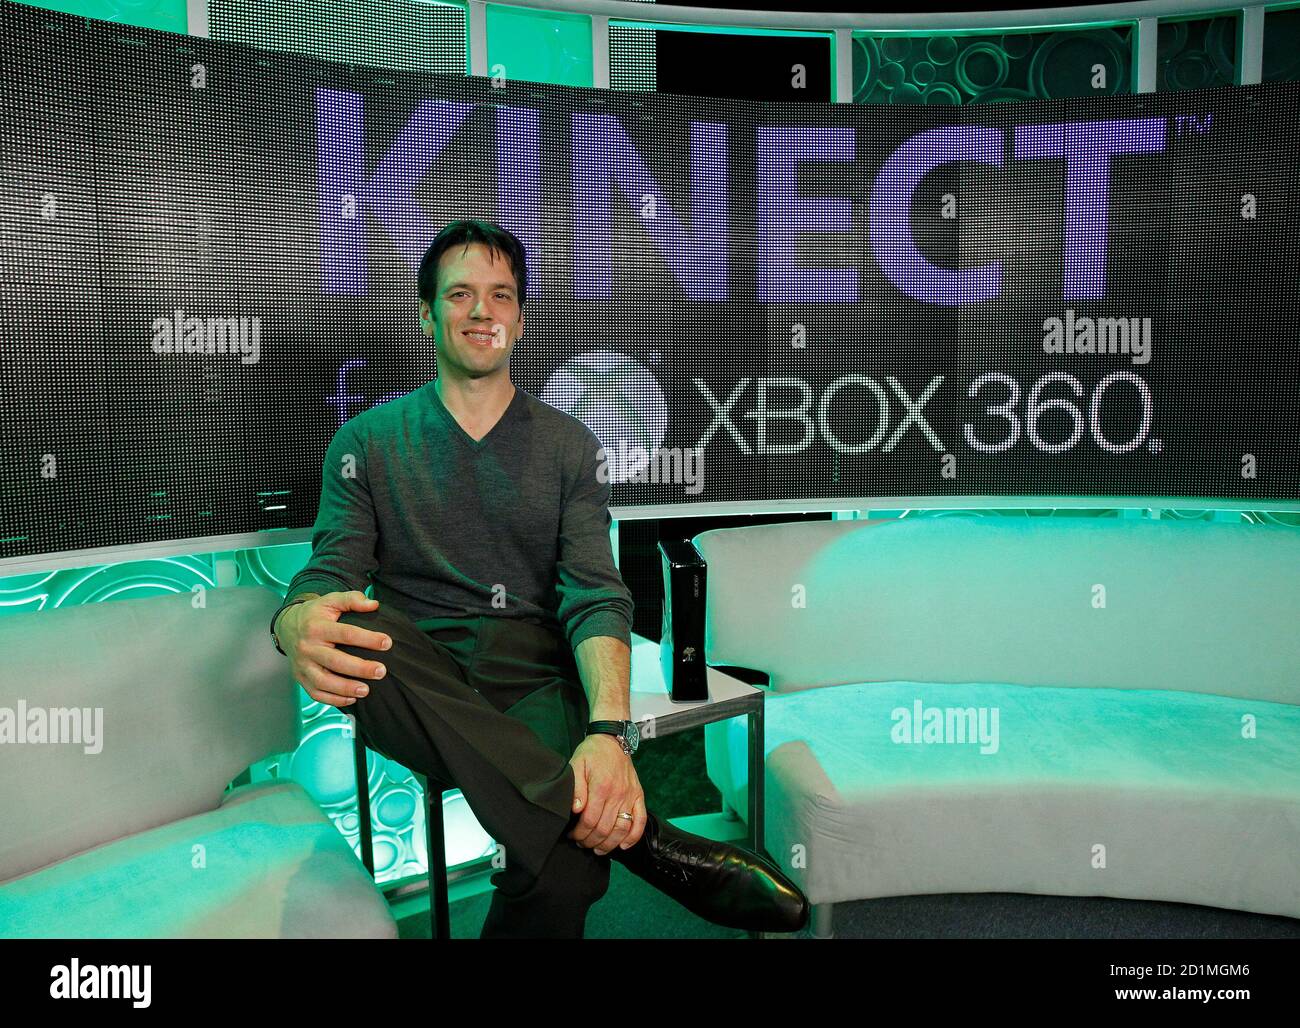 phil-spencer-corporate-vice-president-of-microsoft-game-studios-poses-after-the-xbox-360-media-briefing-at-the-wiltern-theatre-in-los-angeles-june-14-2010-microsoft-corp-christening-its-new-motion-sensing-game-system-kinect-on-sunday-offered-a-sneak-peek-of-upcoming-titles-it-hopes-will-help-draw-a-new-generation-of-casual-players-into-the-40-million-strong-xbox-game-console-fold-reutersmario-anzuoni-united-states-tags-society-sci-tech-2D1MGM6.jpg